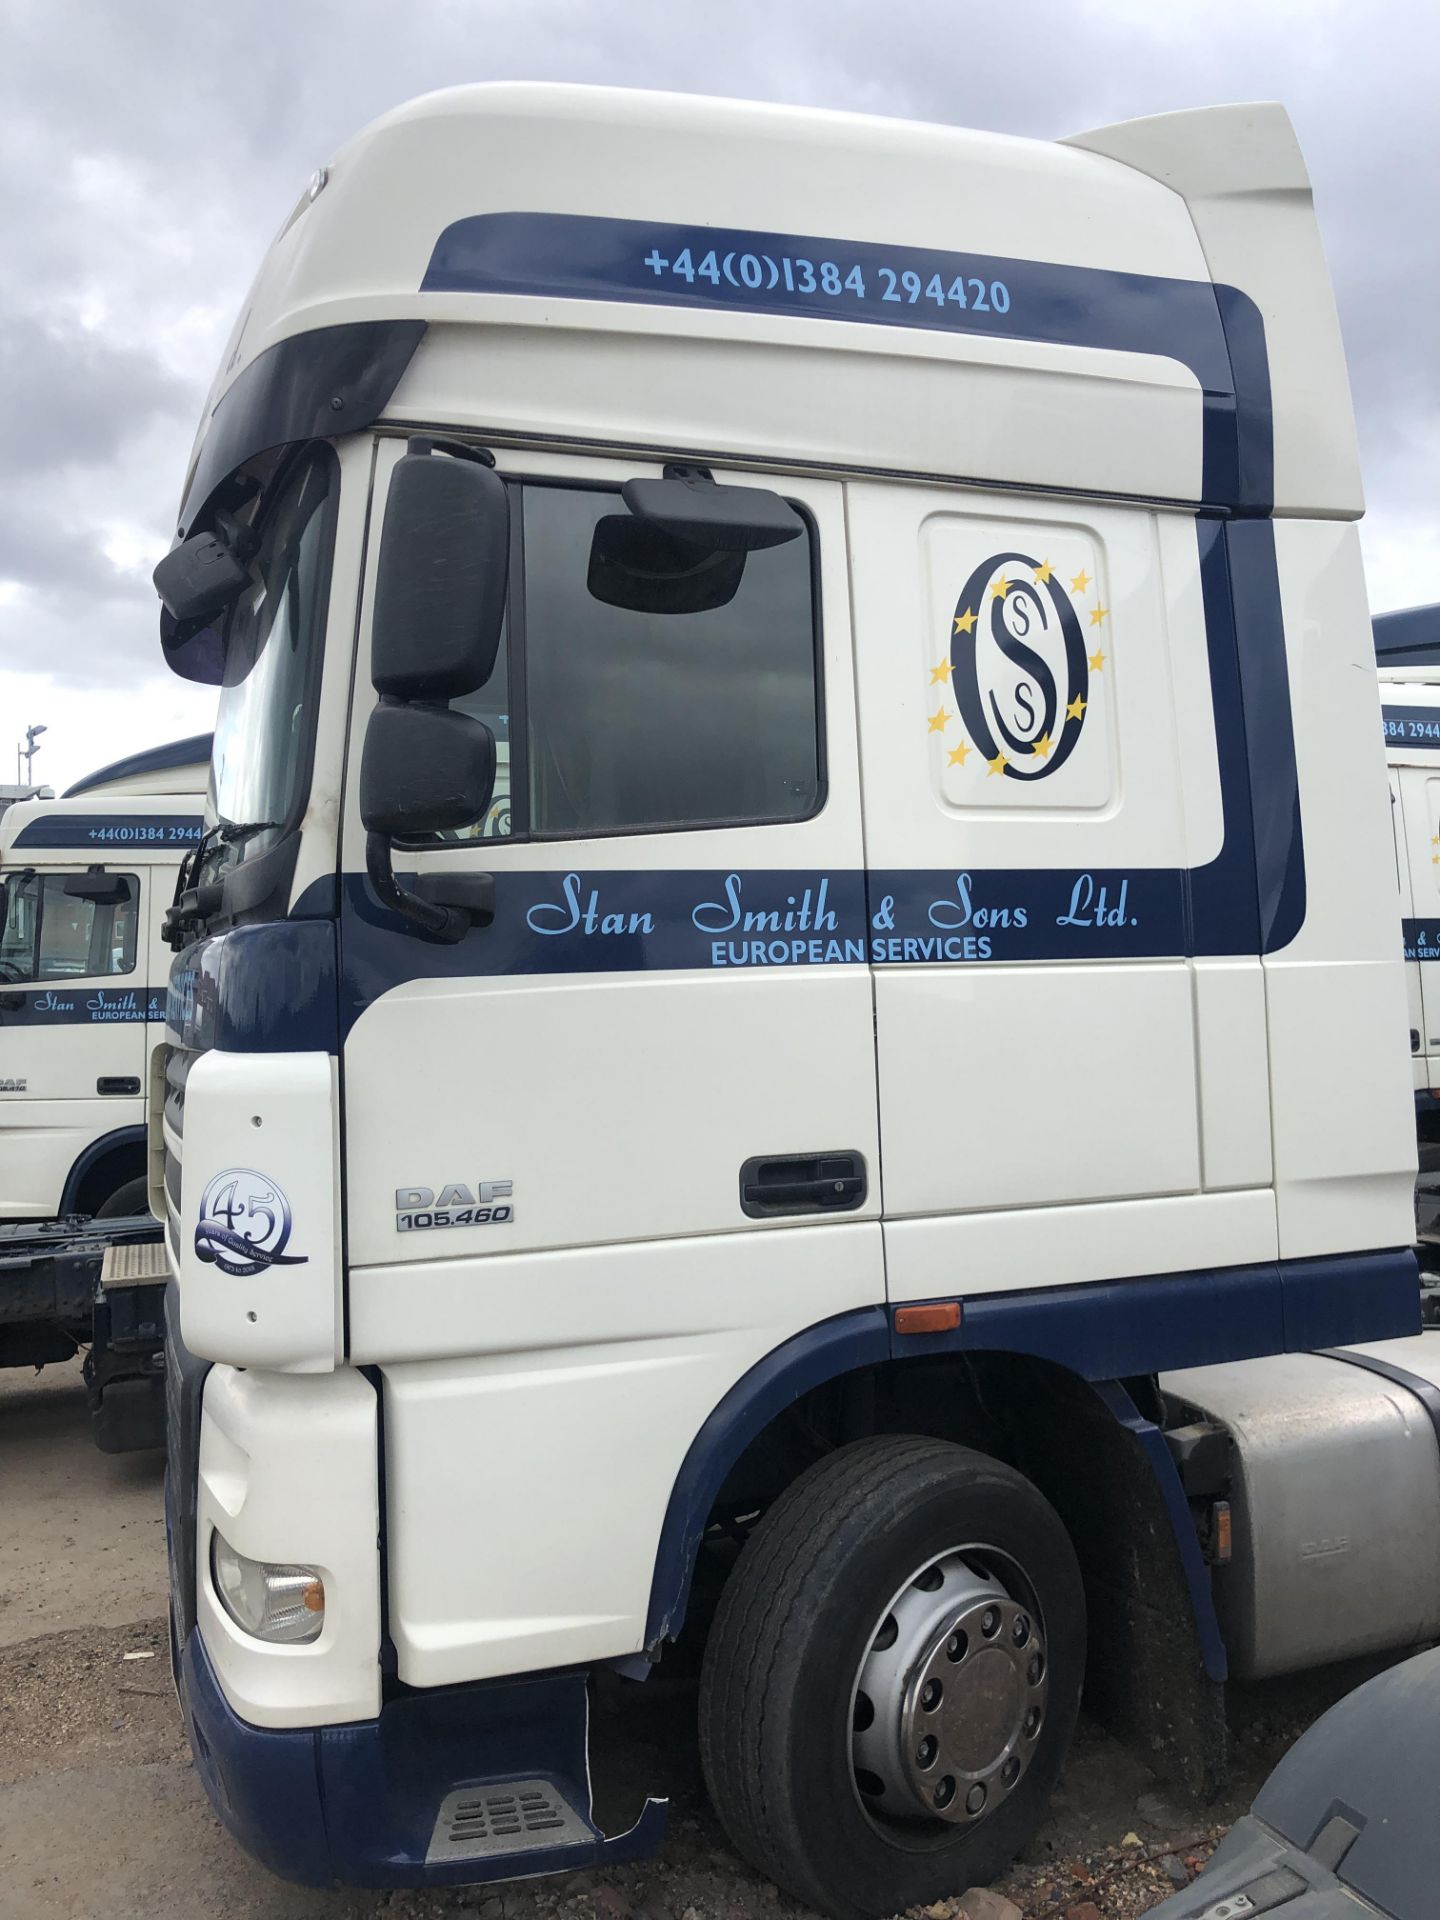 DAF FT XF105.460 SSV Euro 5, 4 x 2 Space Cab Tractor Unit , Recorded Usage 537,191 KM, Automatic - Image 7 of 37